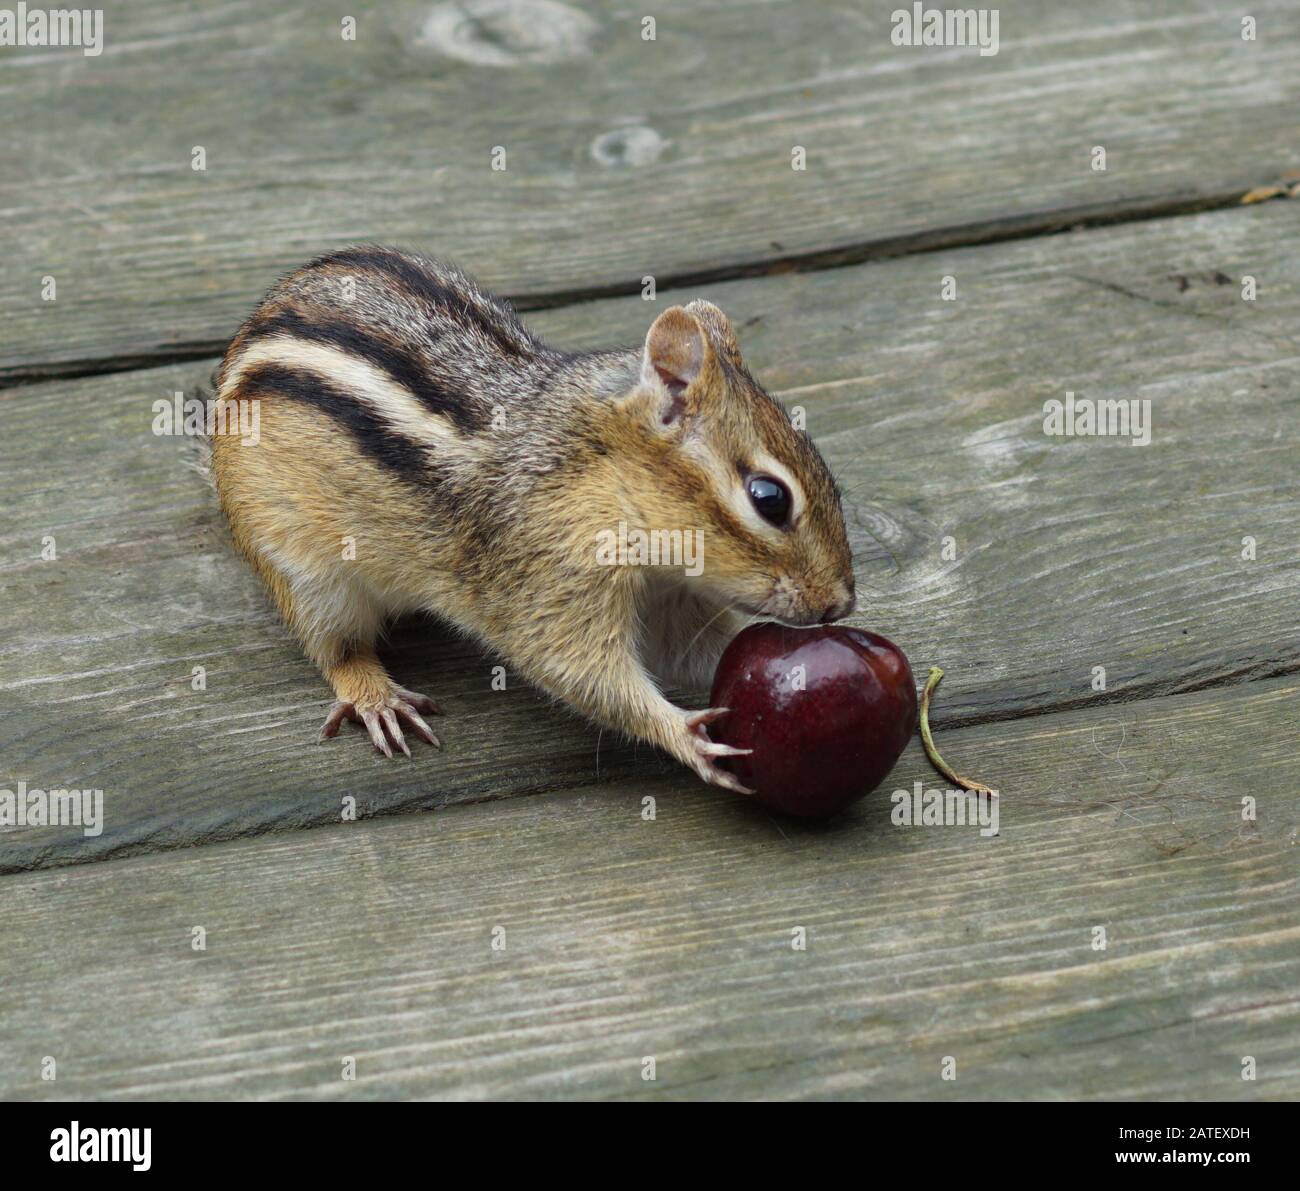 Close-up of a cute chipmunk eating a cherry Stock Photo